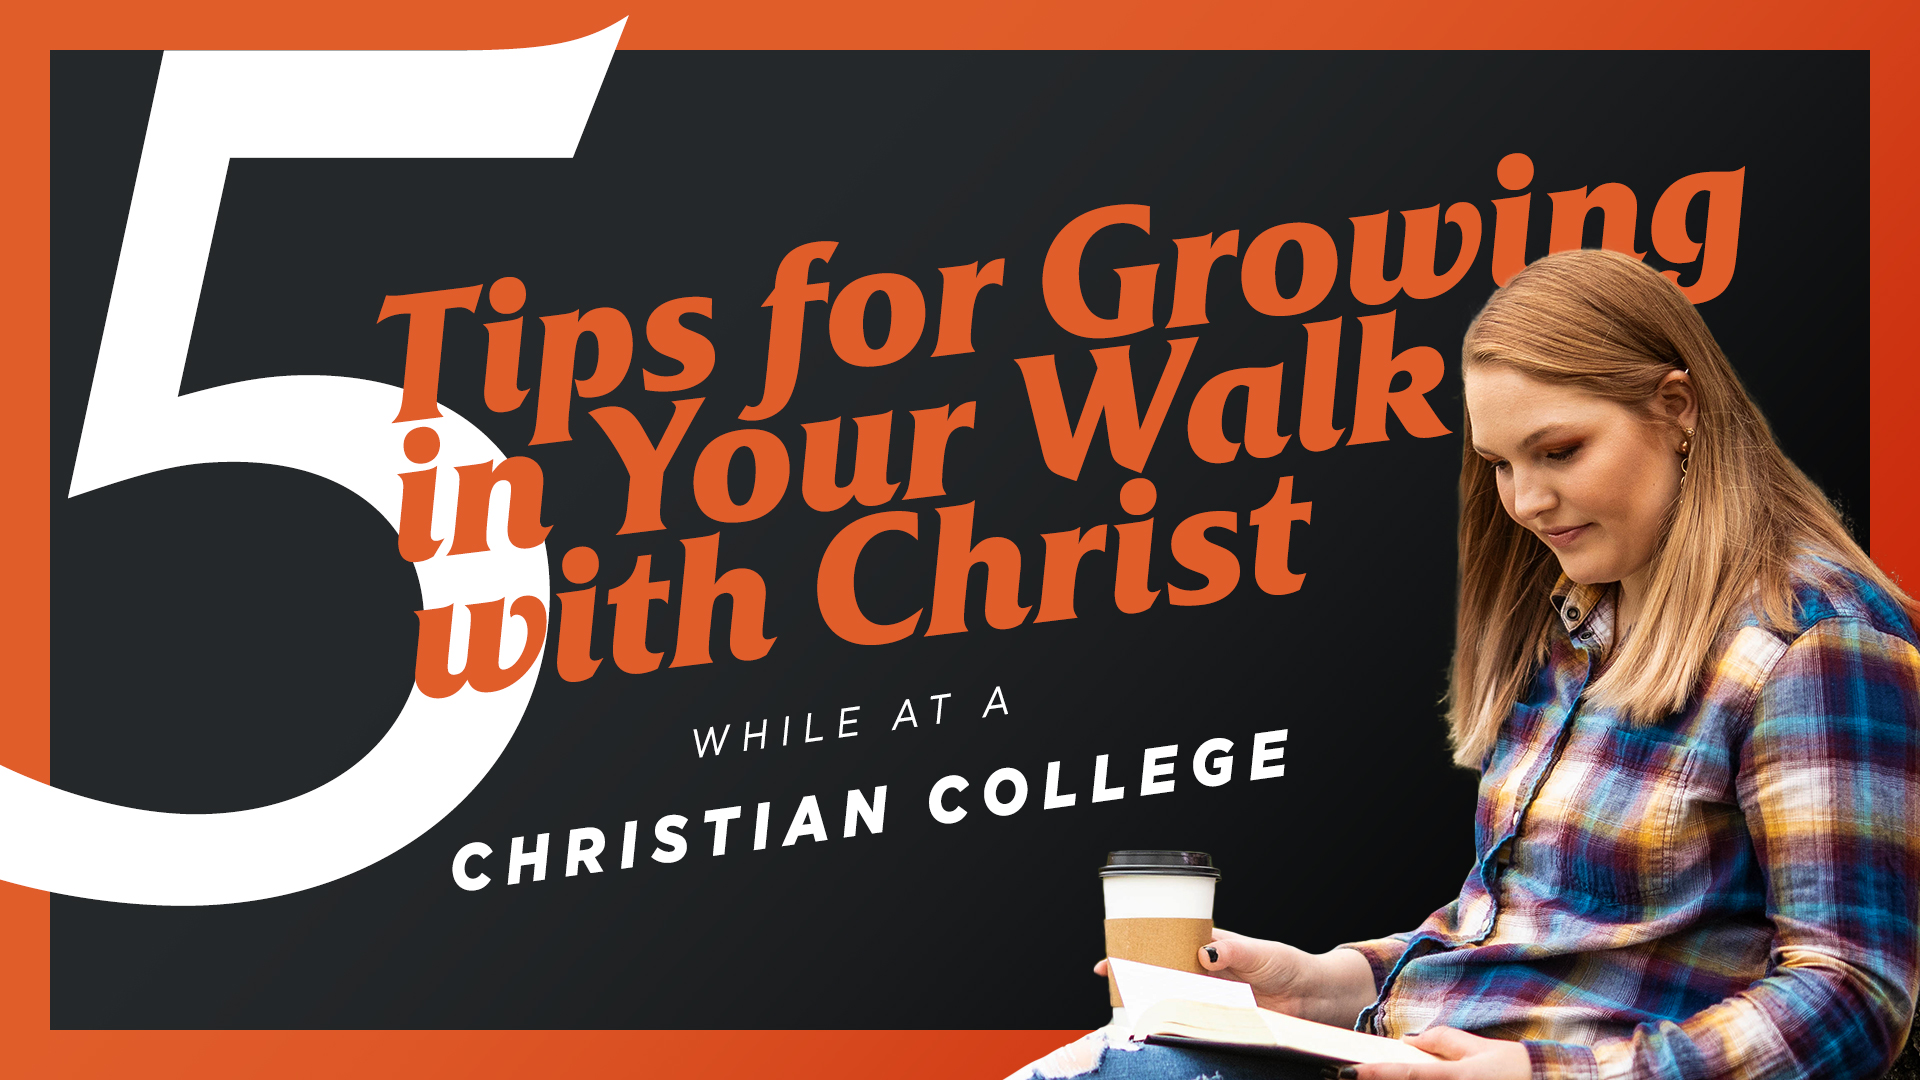 5 Tips for Growing in Your Walk With Christ While at Christian College